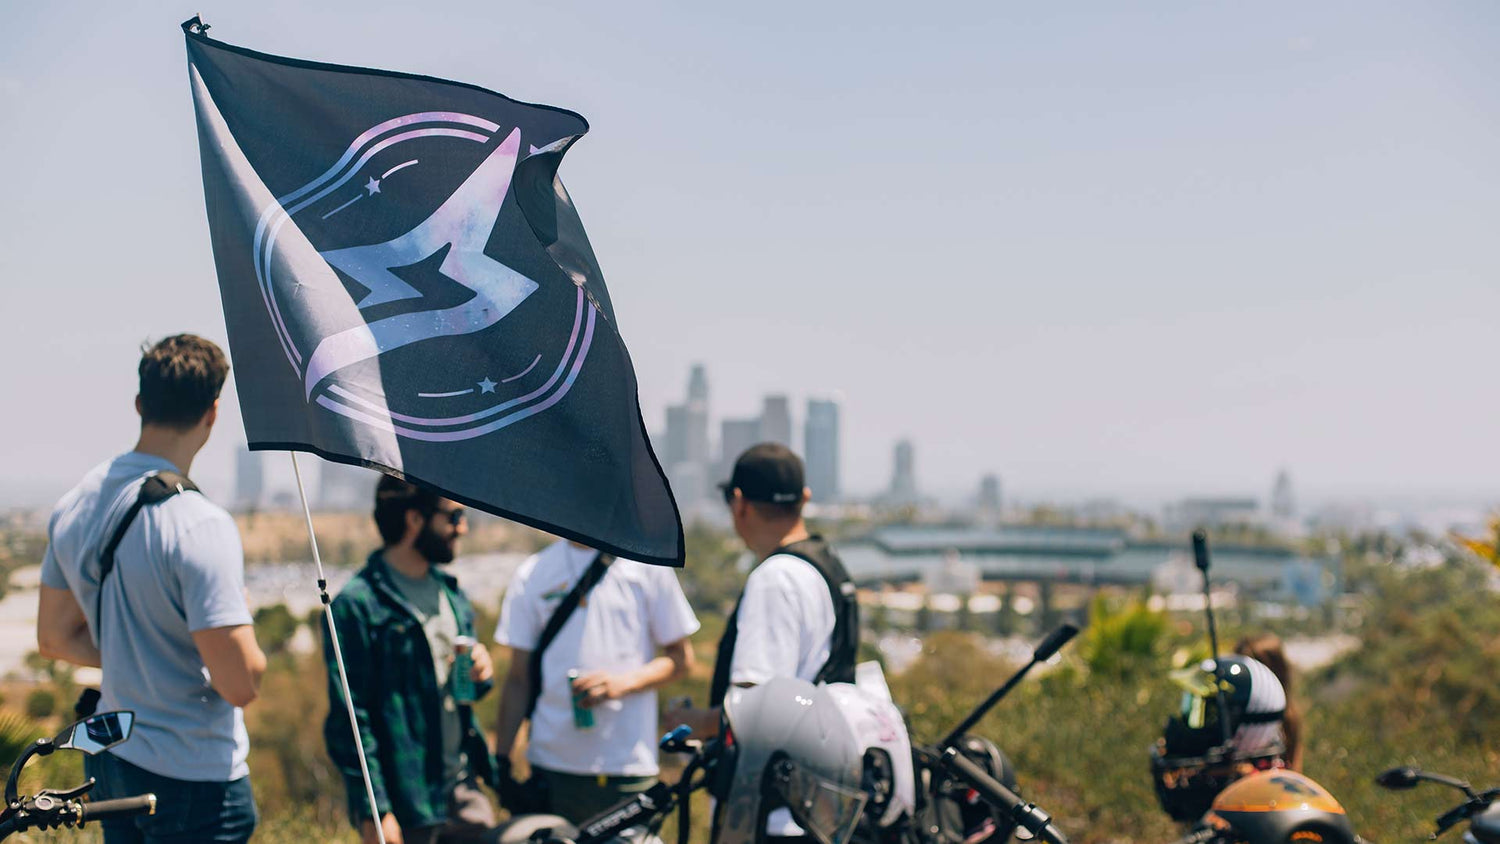 Super Squad flag waving in the wind during a rider meetup